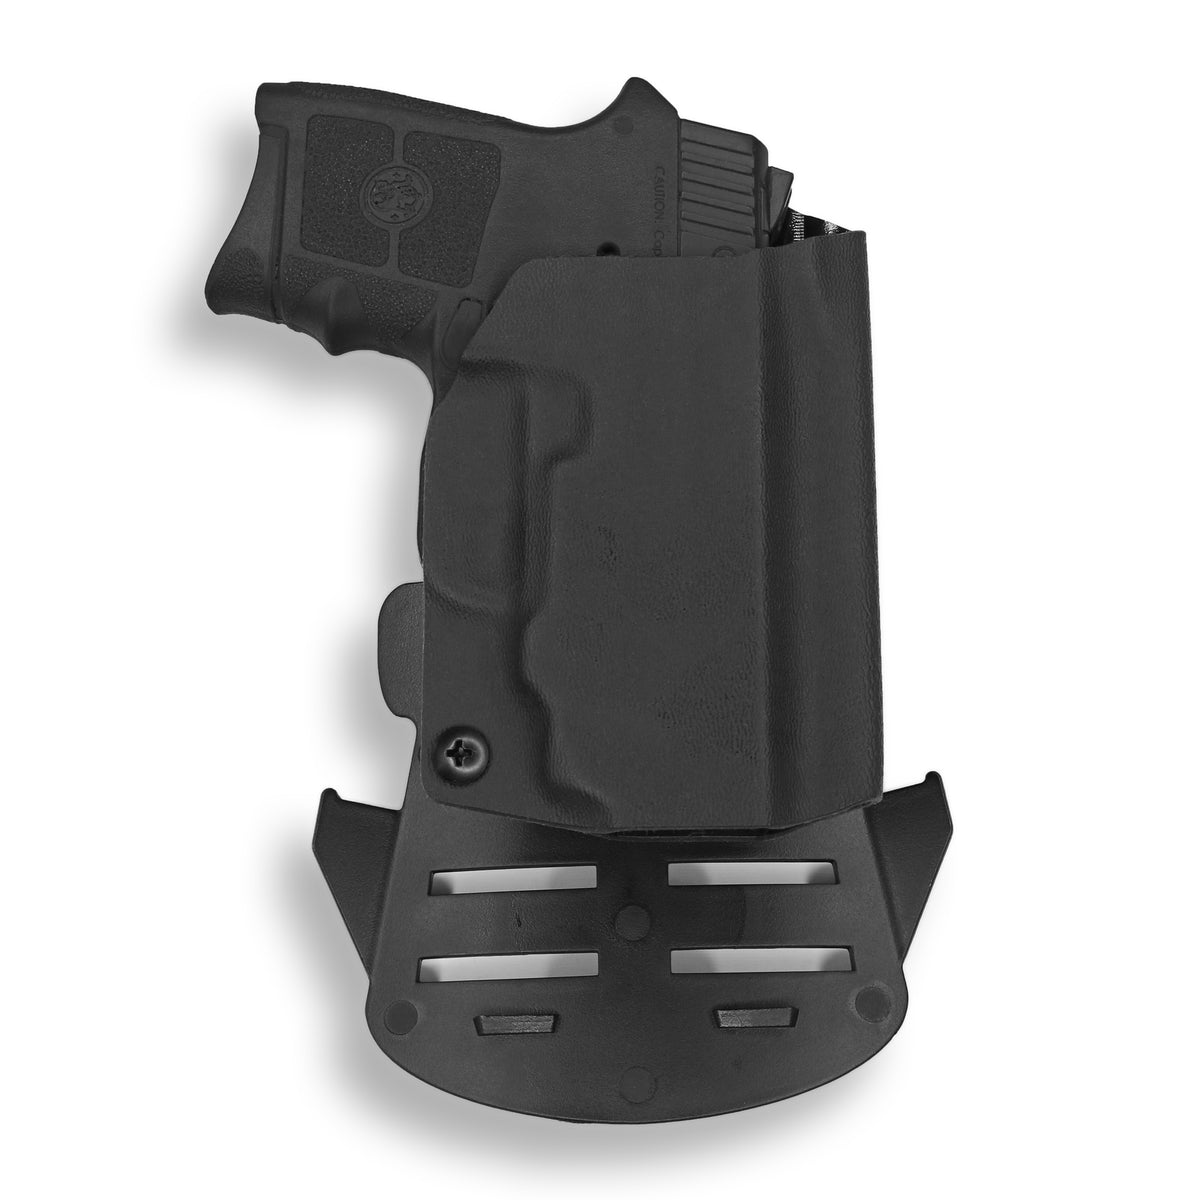 Pistol holster With Magazine Pouch For Smith & Wesson Bodyguard 380 W/O Laser 